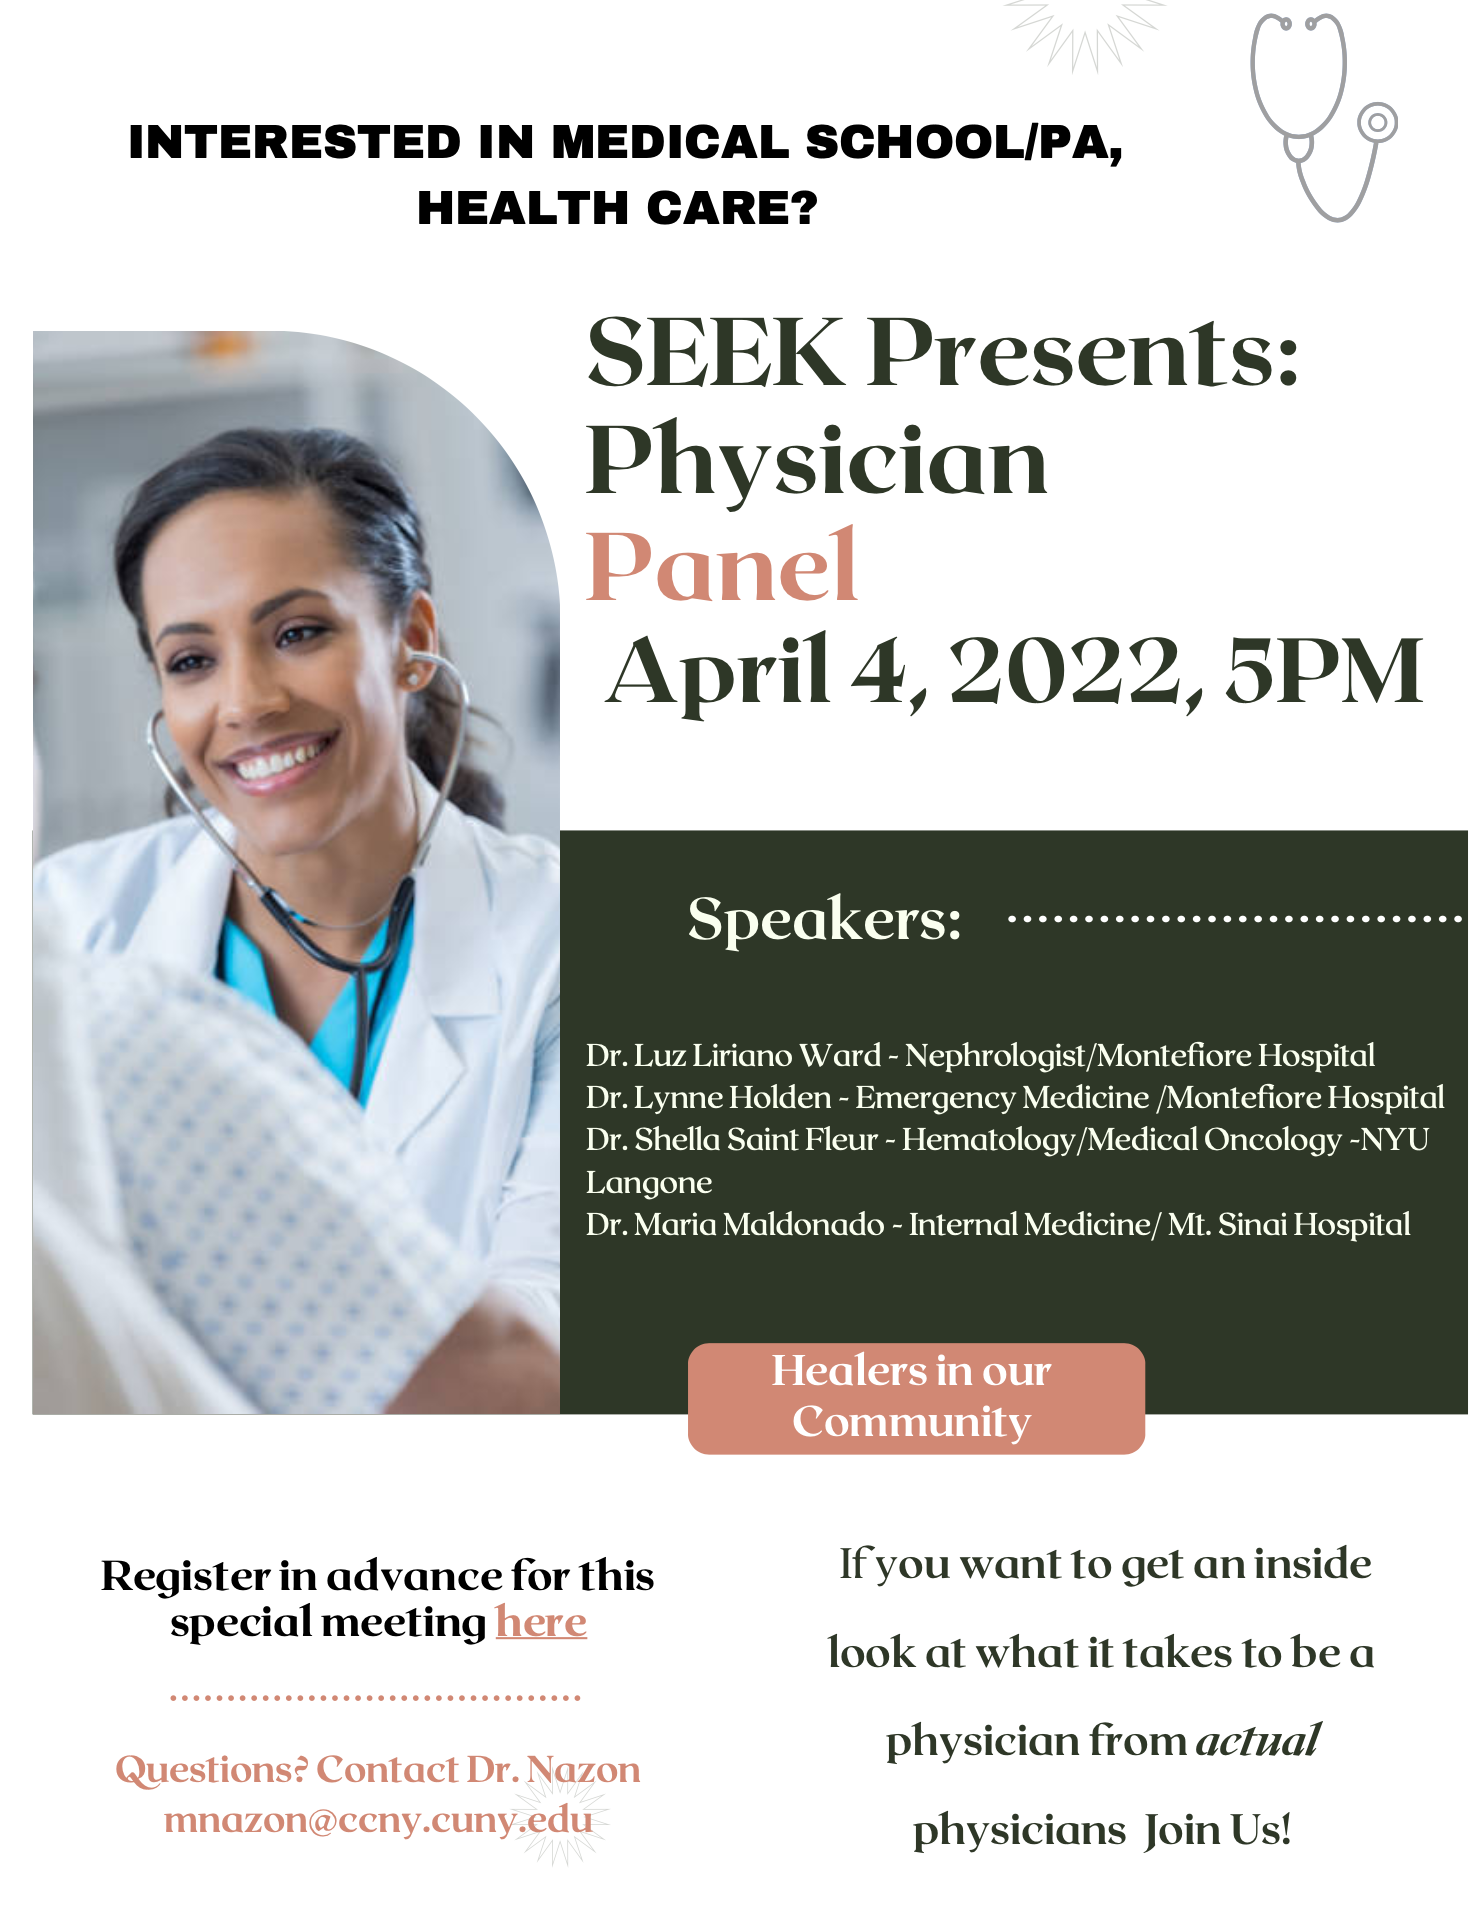 SEEK Presents - Physician Panel: The Road To Medical School